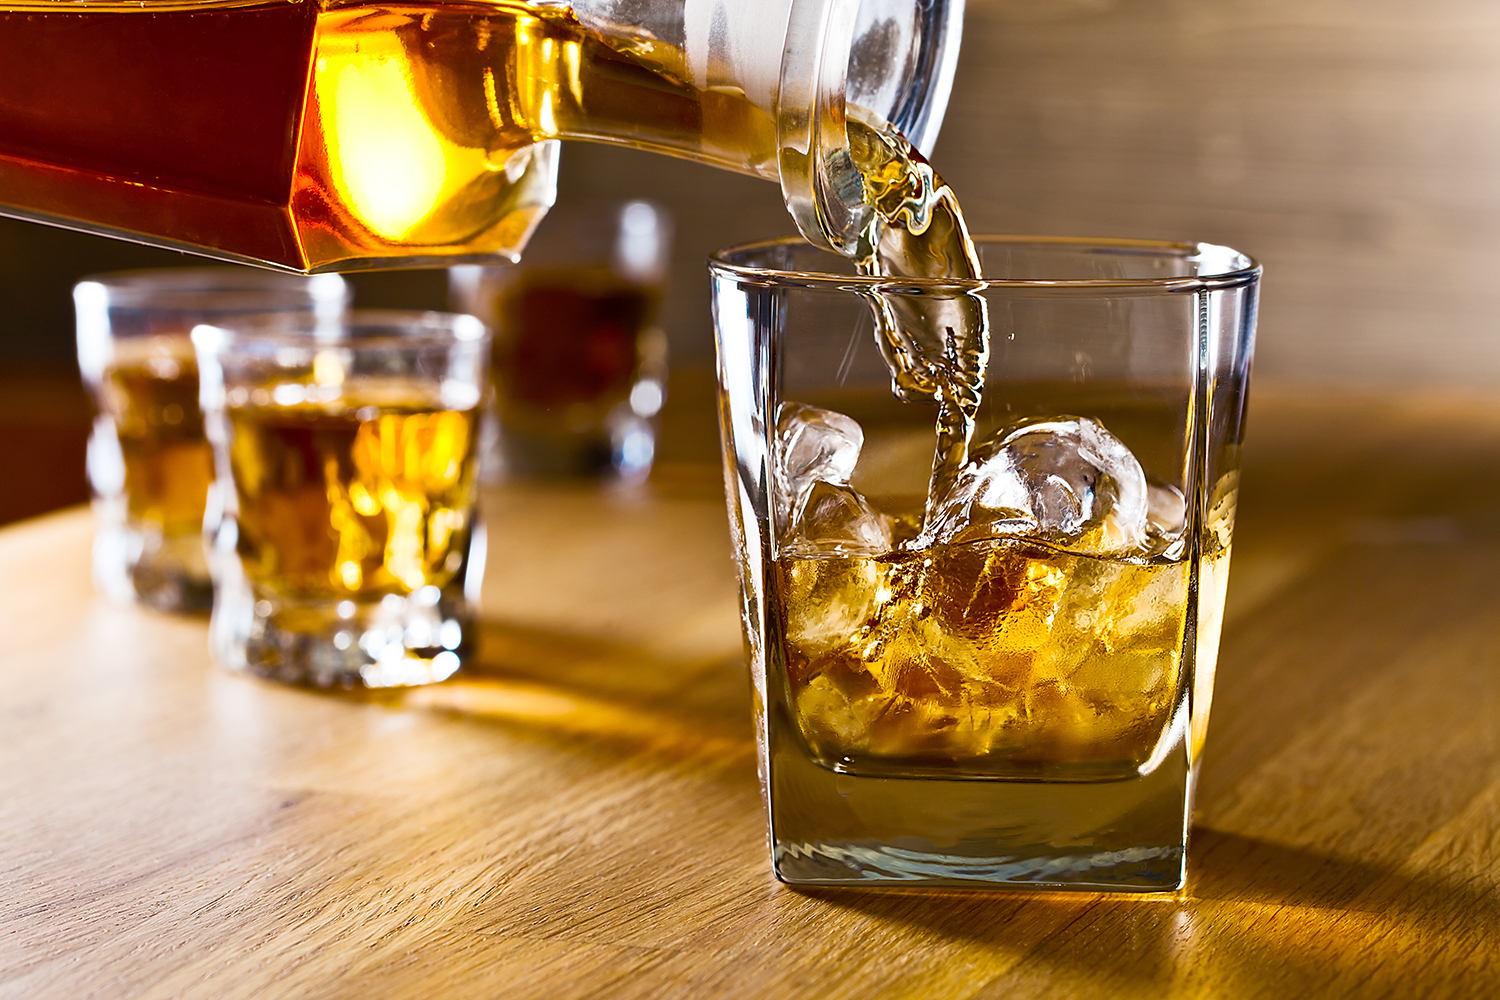 Longer Abstention from Alcohol Lowers Atrial Fibrillation Risk ...